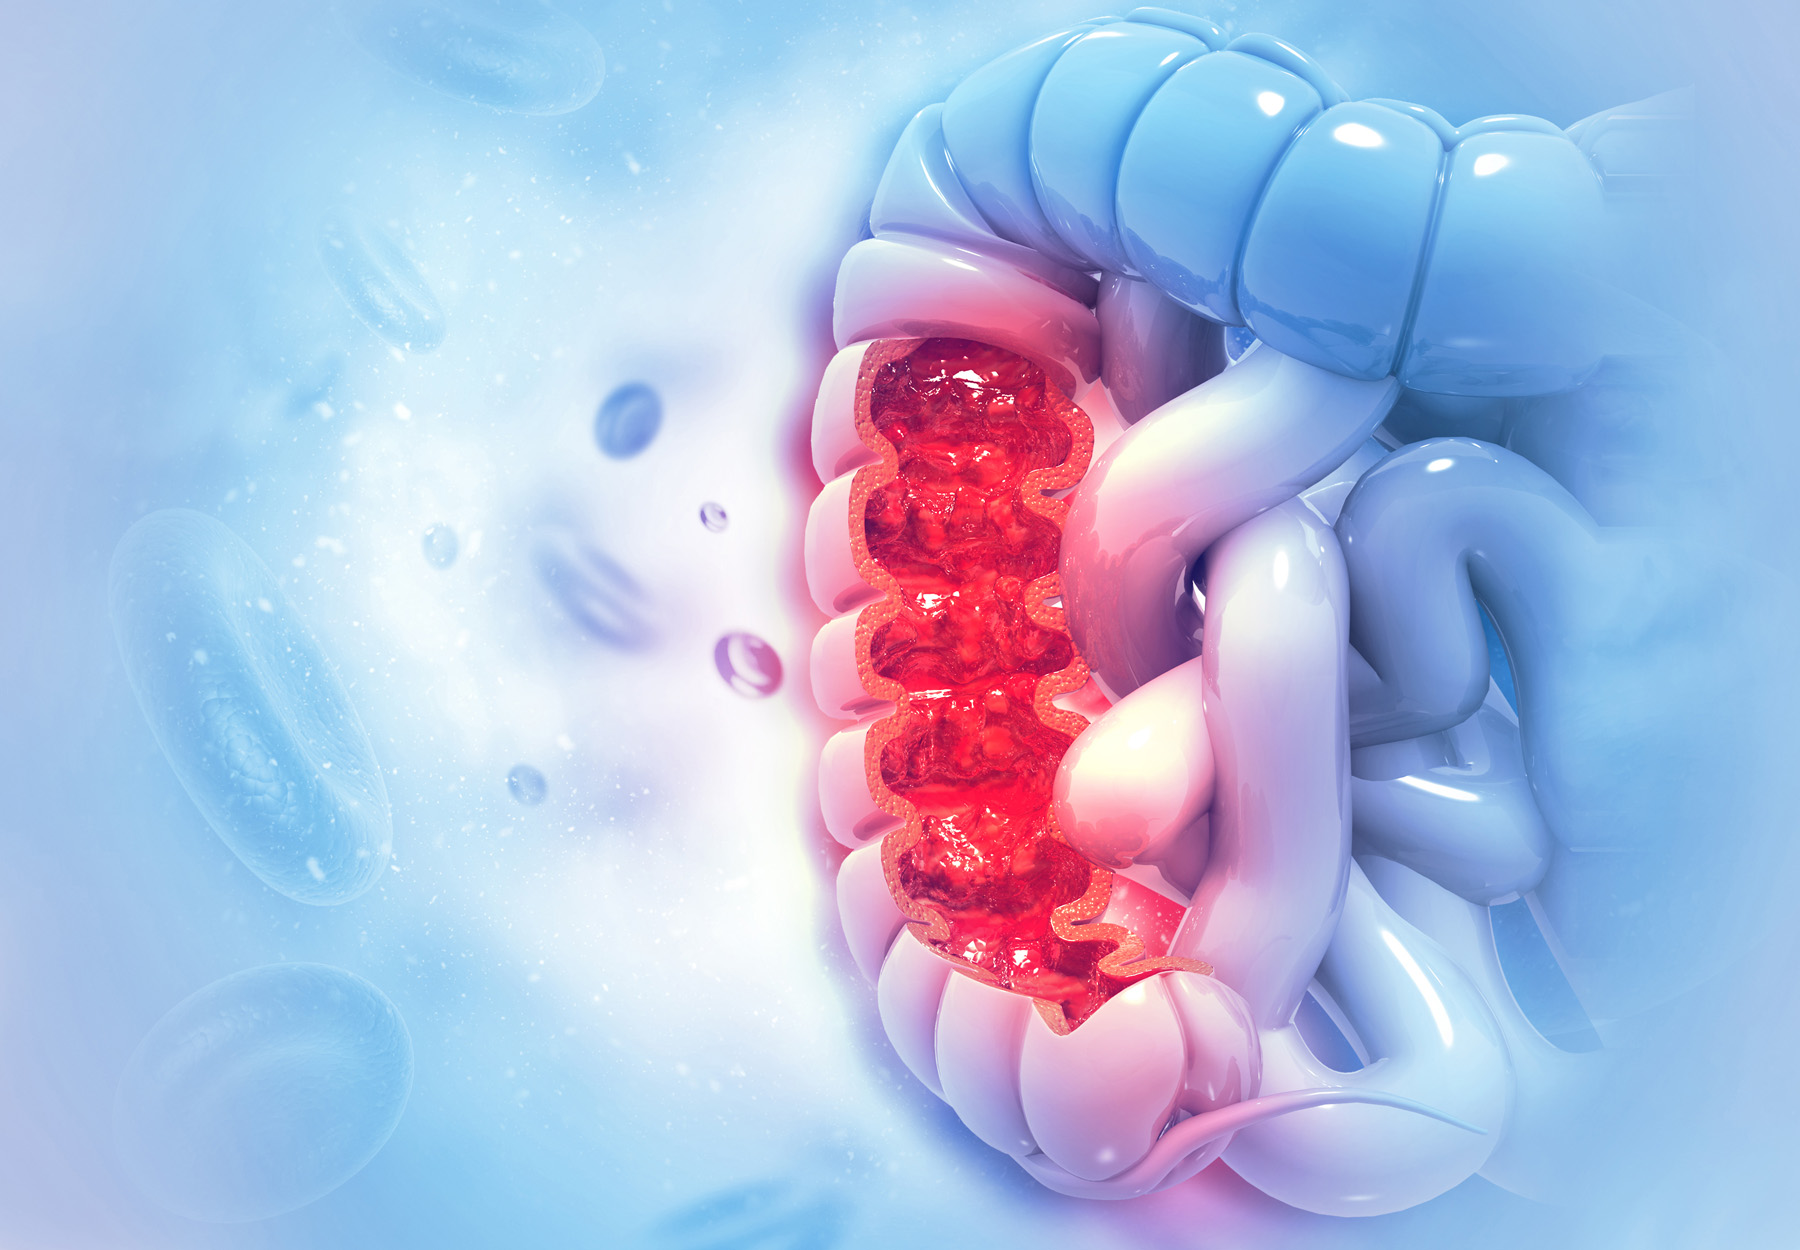 a blue stock illustration of a diseased colon with the diseased area in red